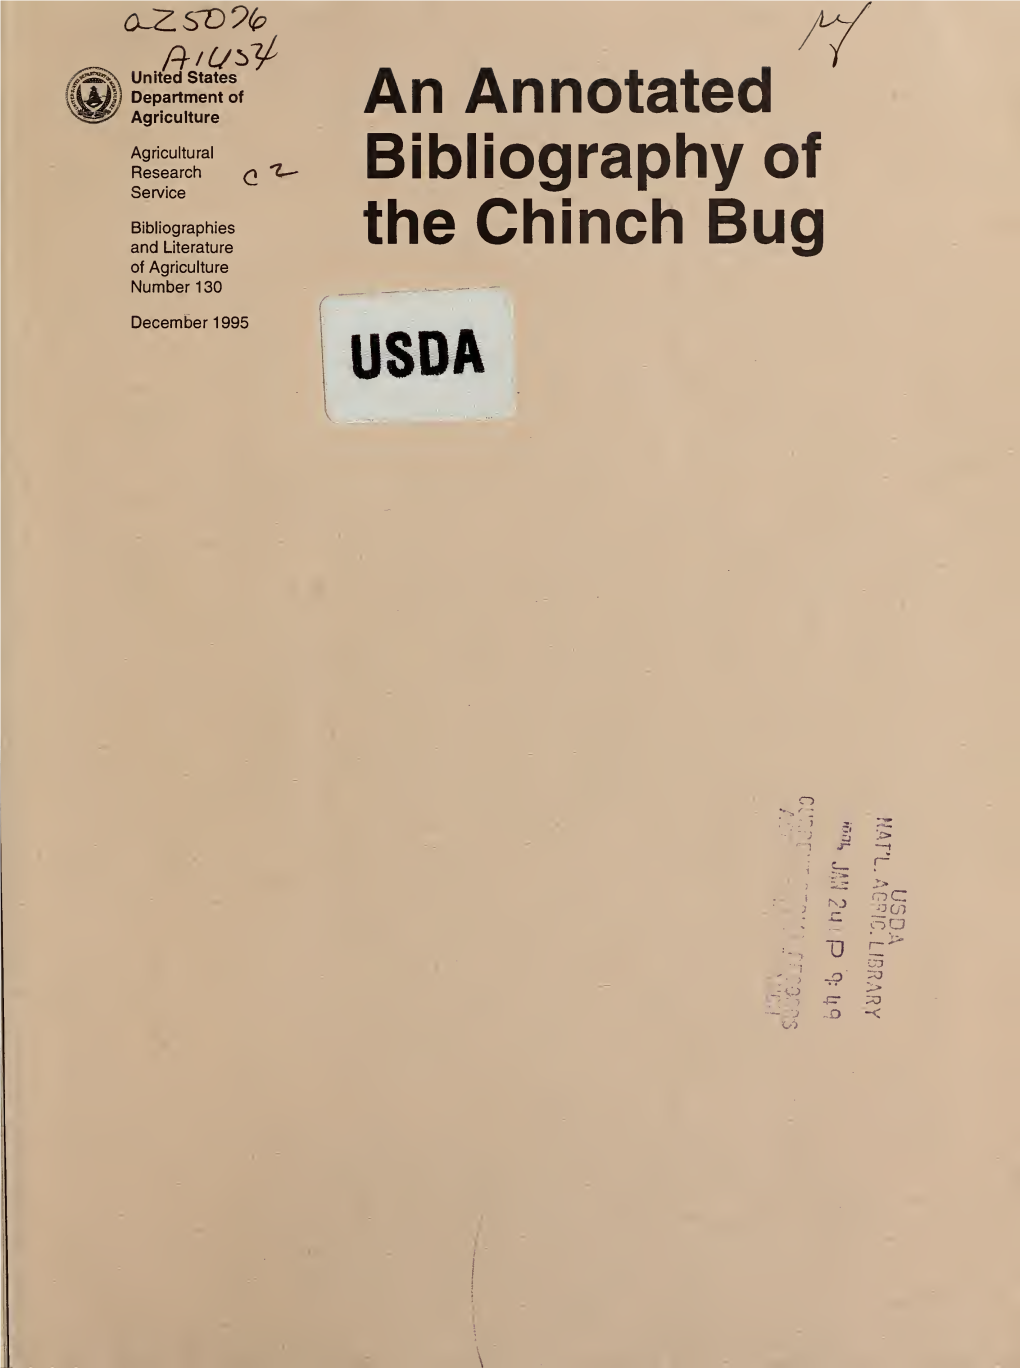 An Annotated Bibliography of the Chinch Bug